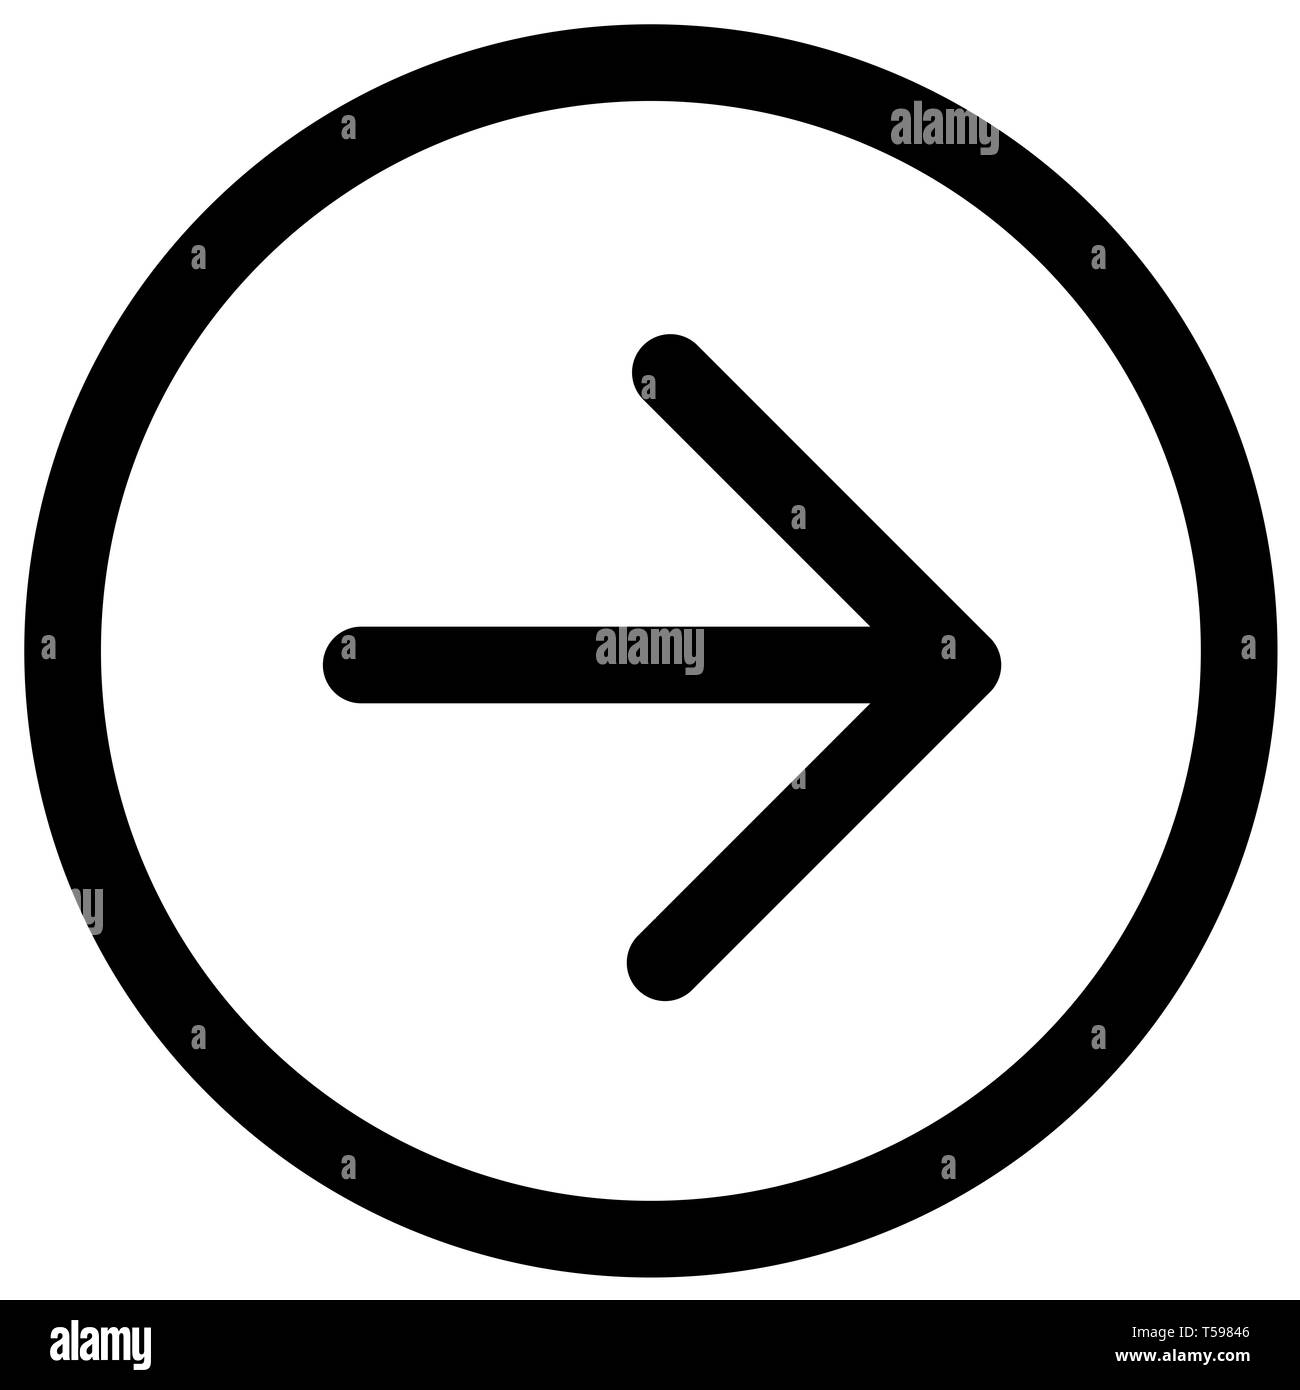 black Arrow pointing right direction symbol. black Directional Arrow sign icon. Flat right arrow symbol in Round. Simple black circle shape button on  Stock Photo